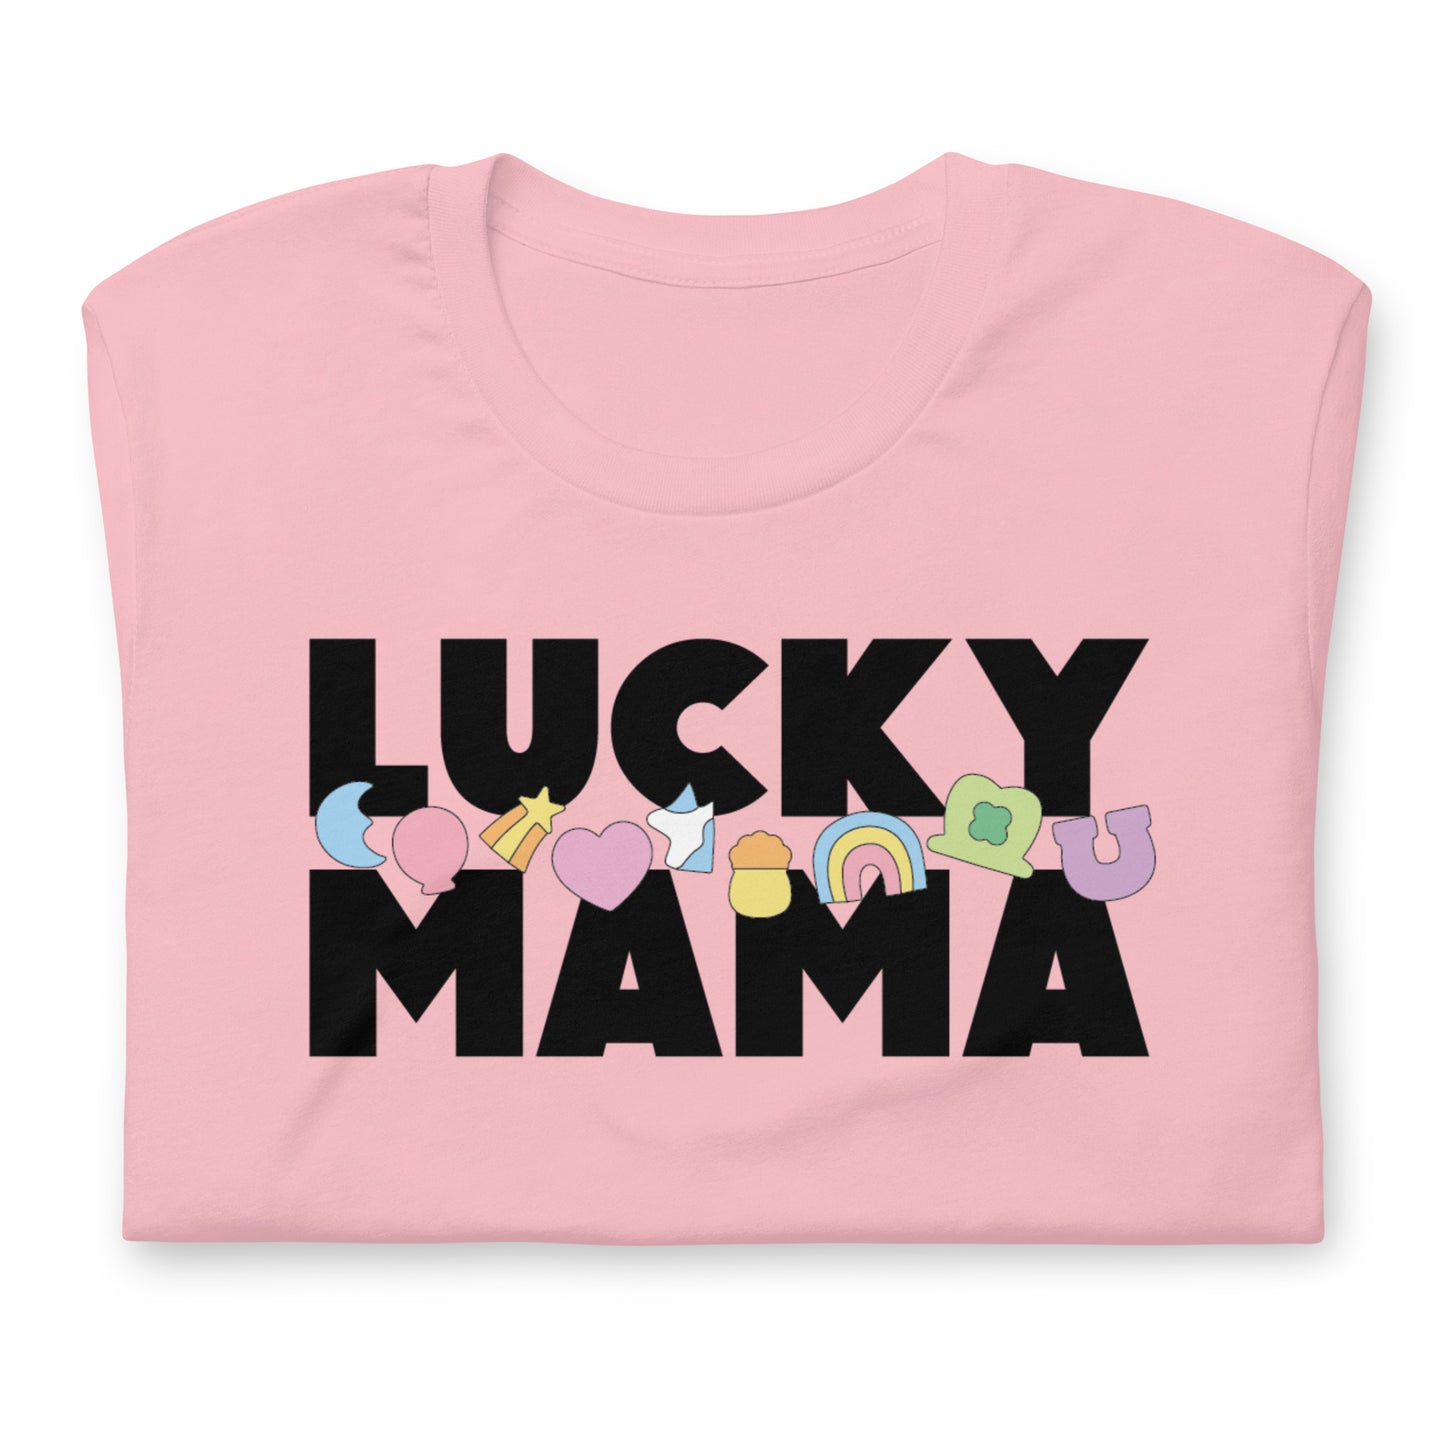 Lucky Mama - Black ink